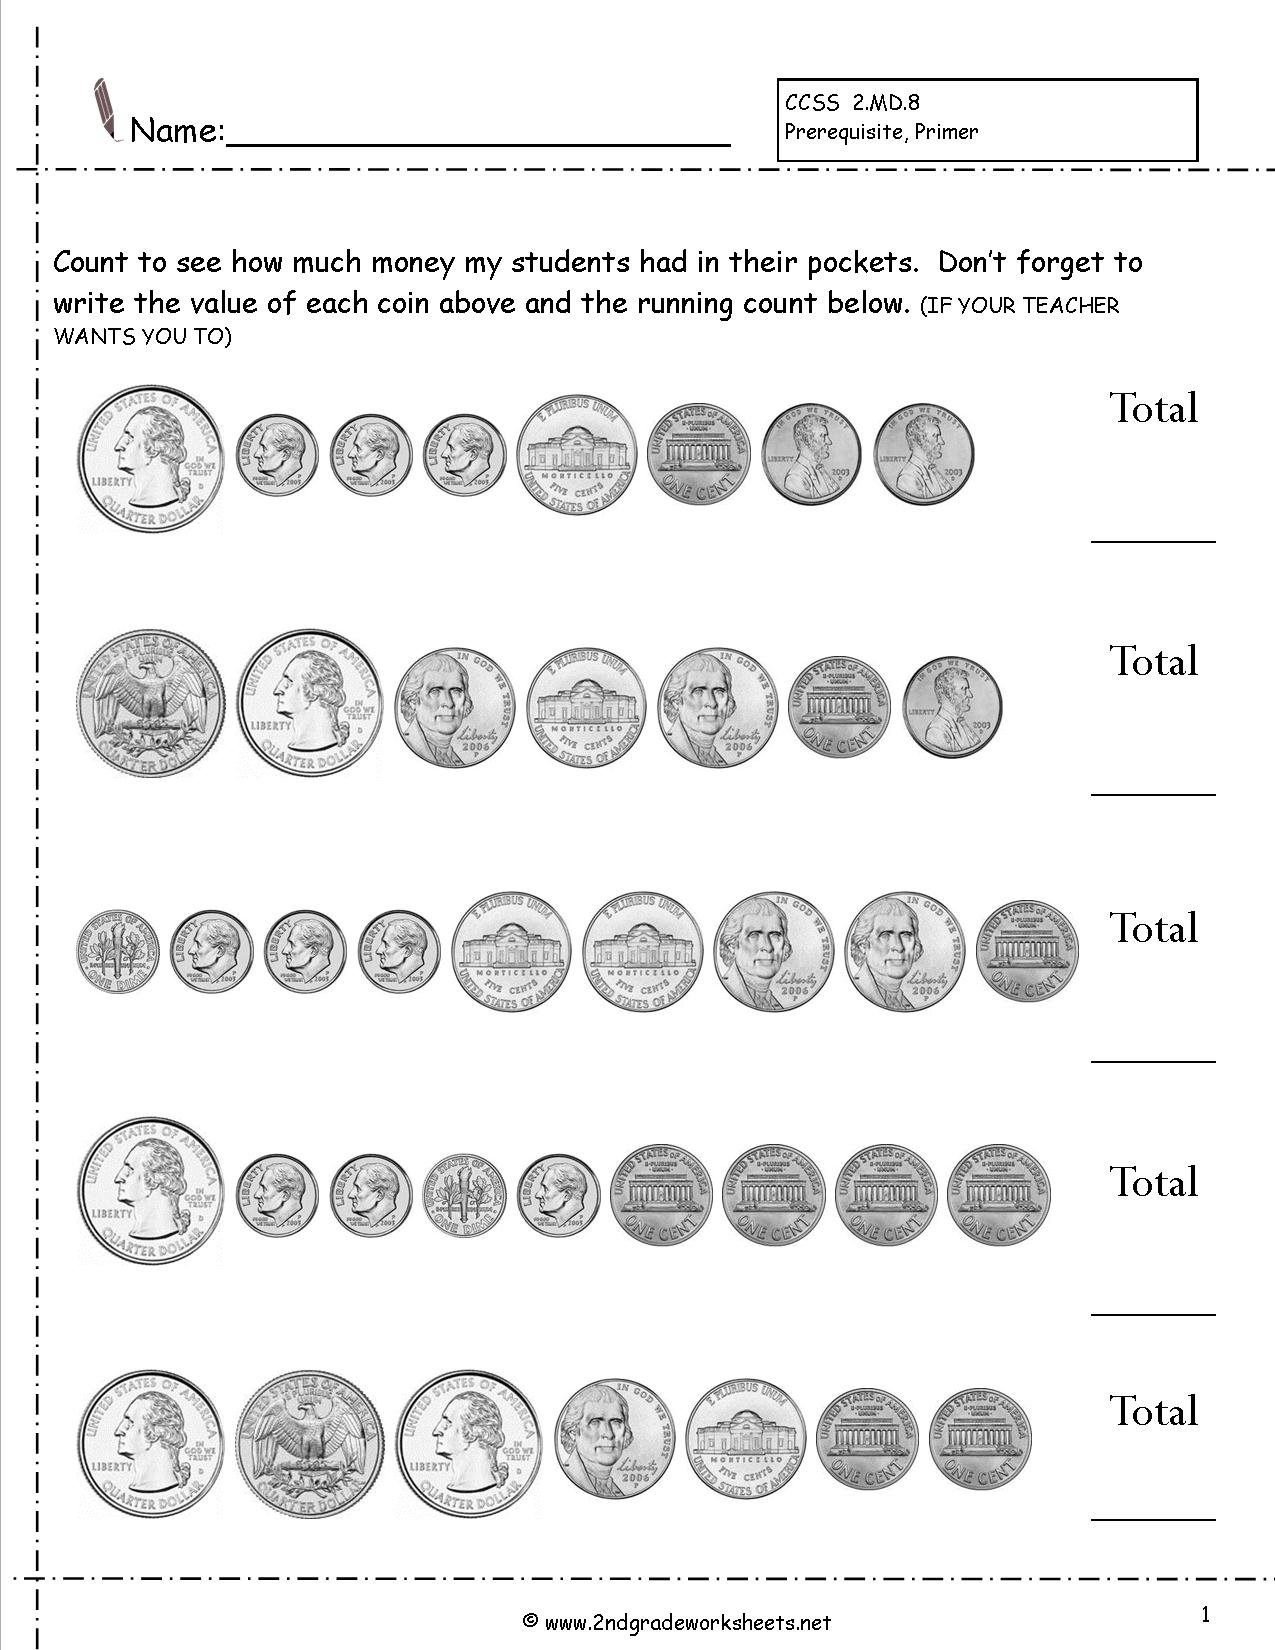 Counting Coins And Money Worksheets And Printouts Within Counting Coins Worksheets